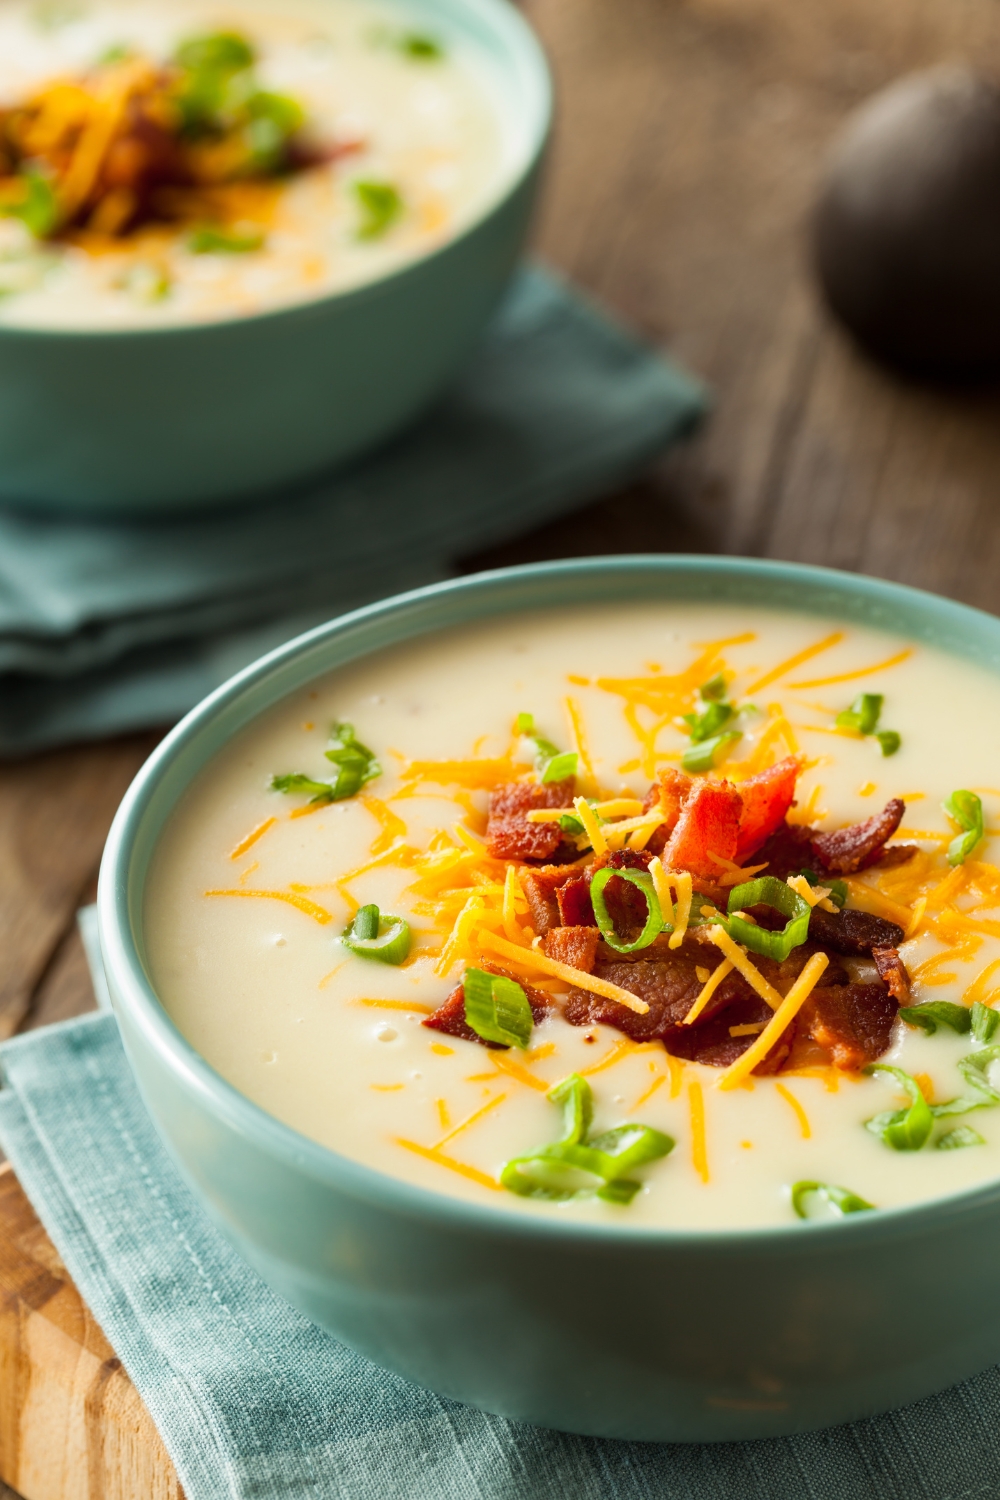 Homemade Sweet Potato Soup with Bacon, Cheese and Onions in a Bowl